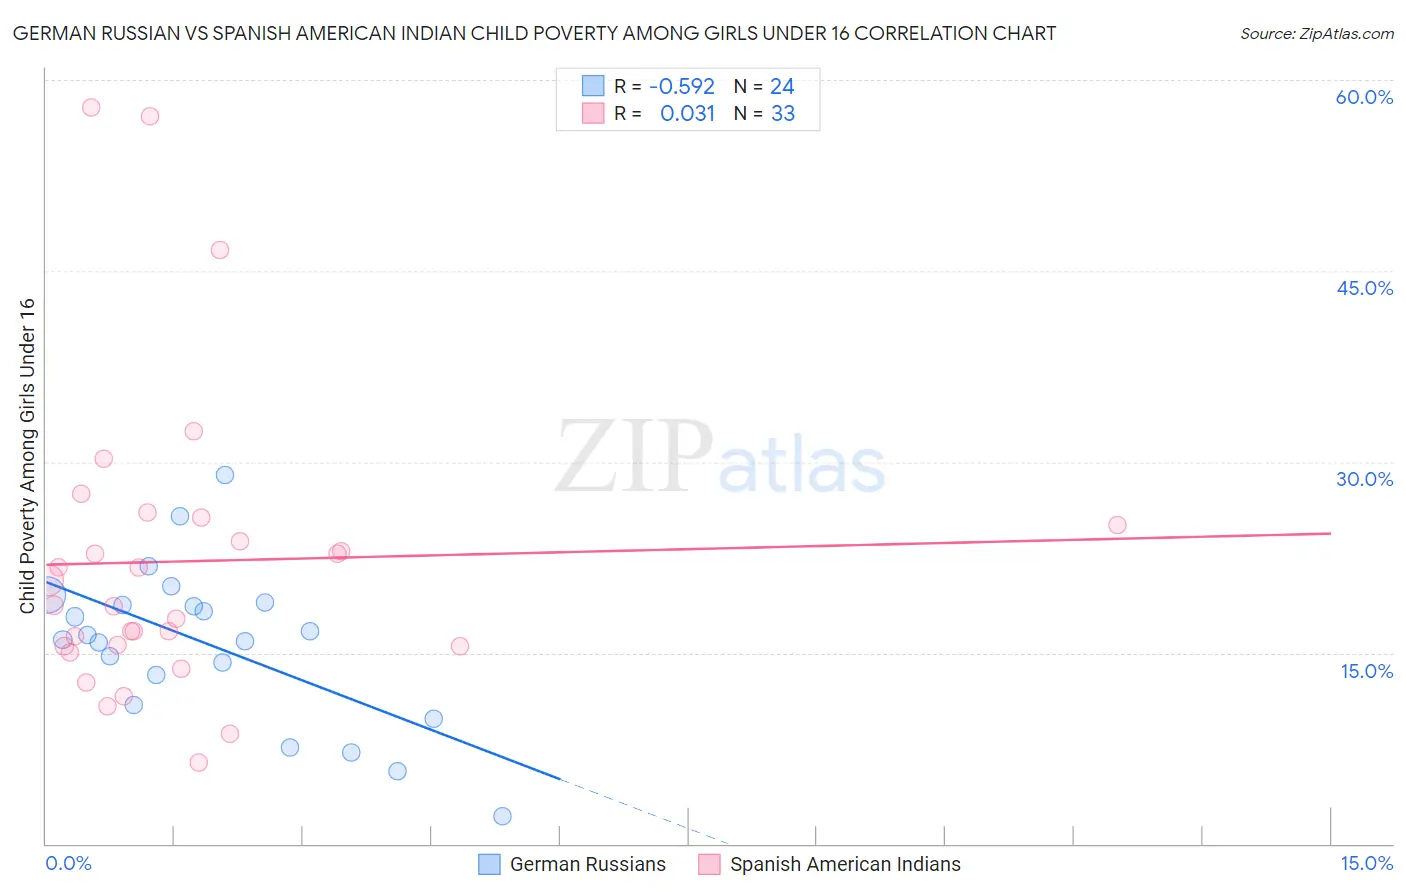 German Russian vs Spanish American Indian Child Poverty Among Girls Under 16